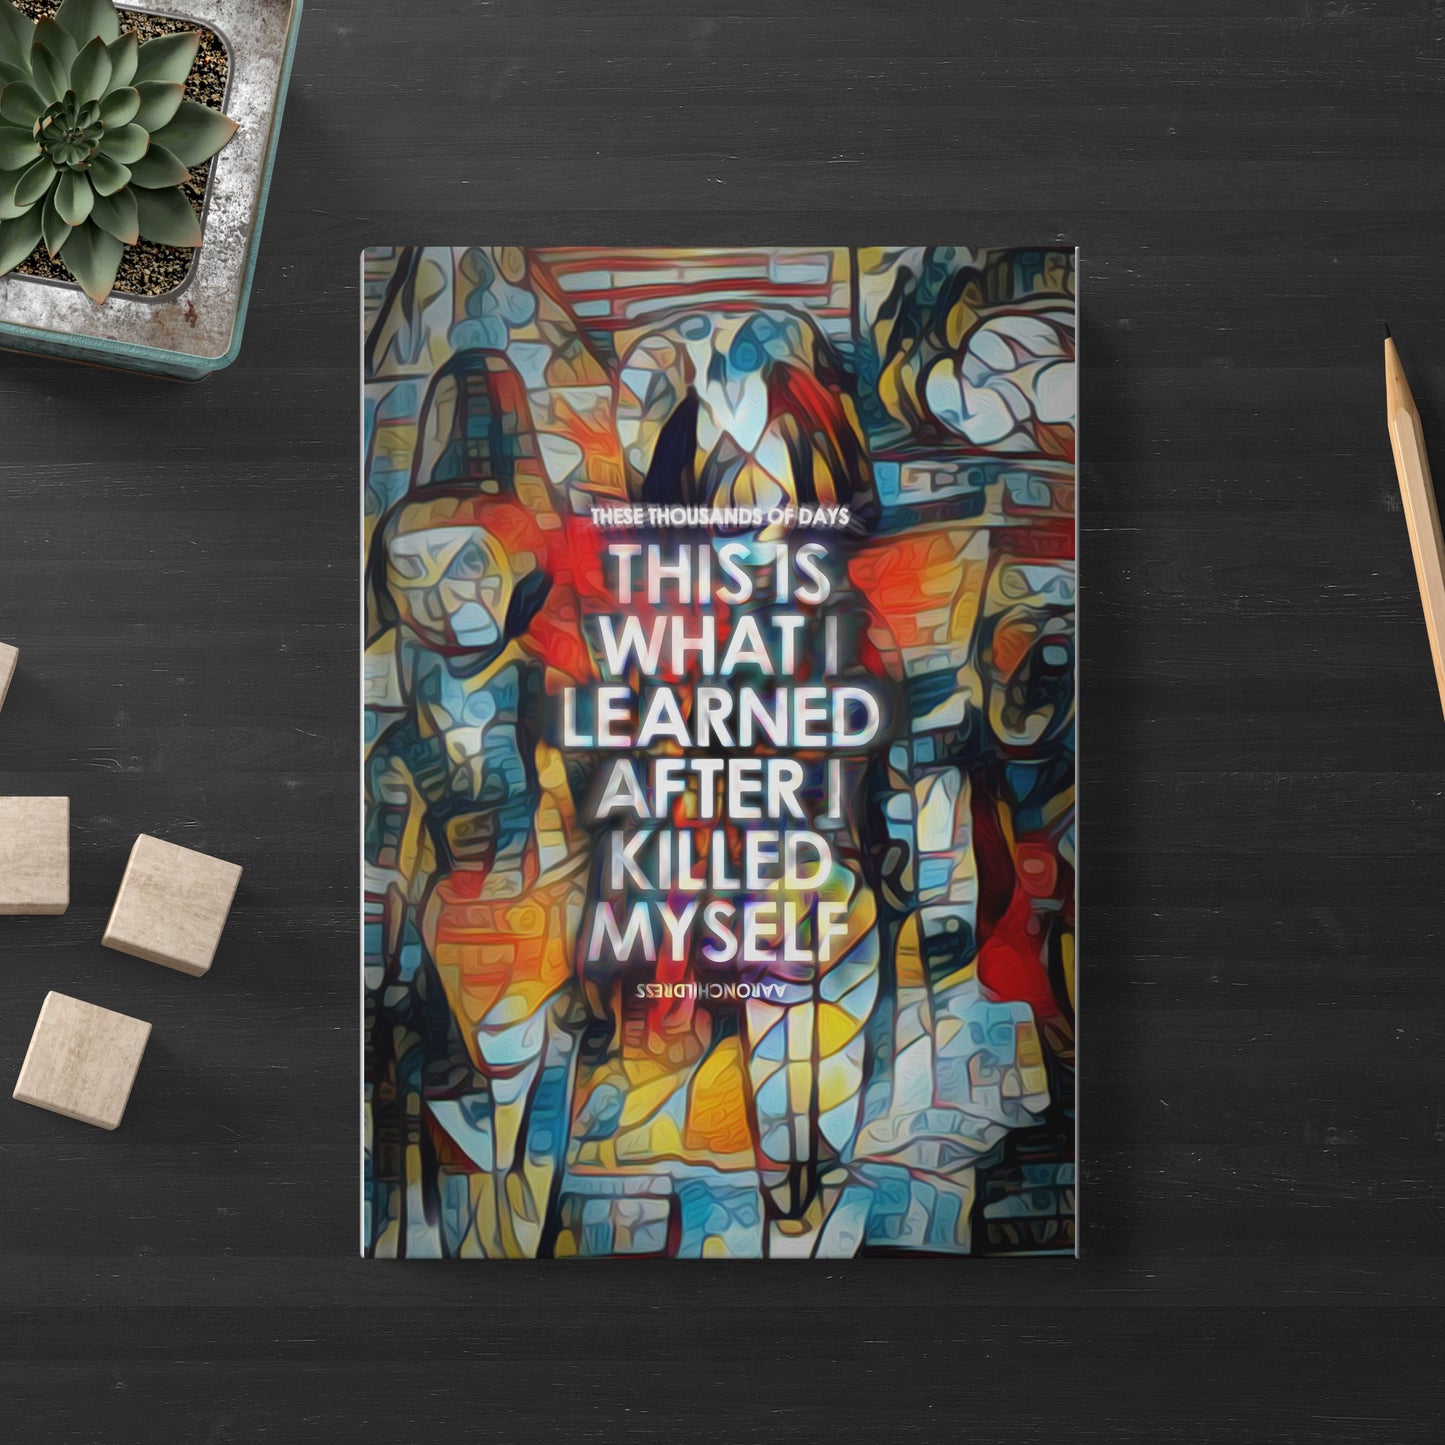 These Thousands of Days: This is What I Learned After I Killed Myself (Hardback)